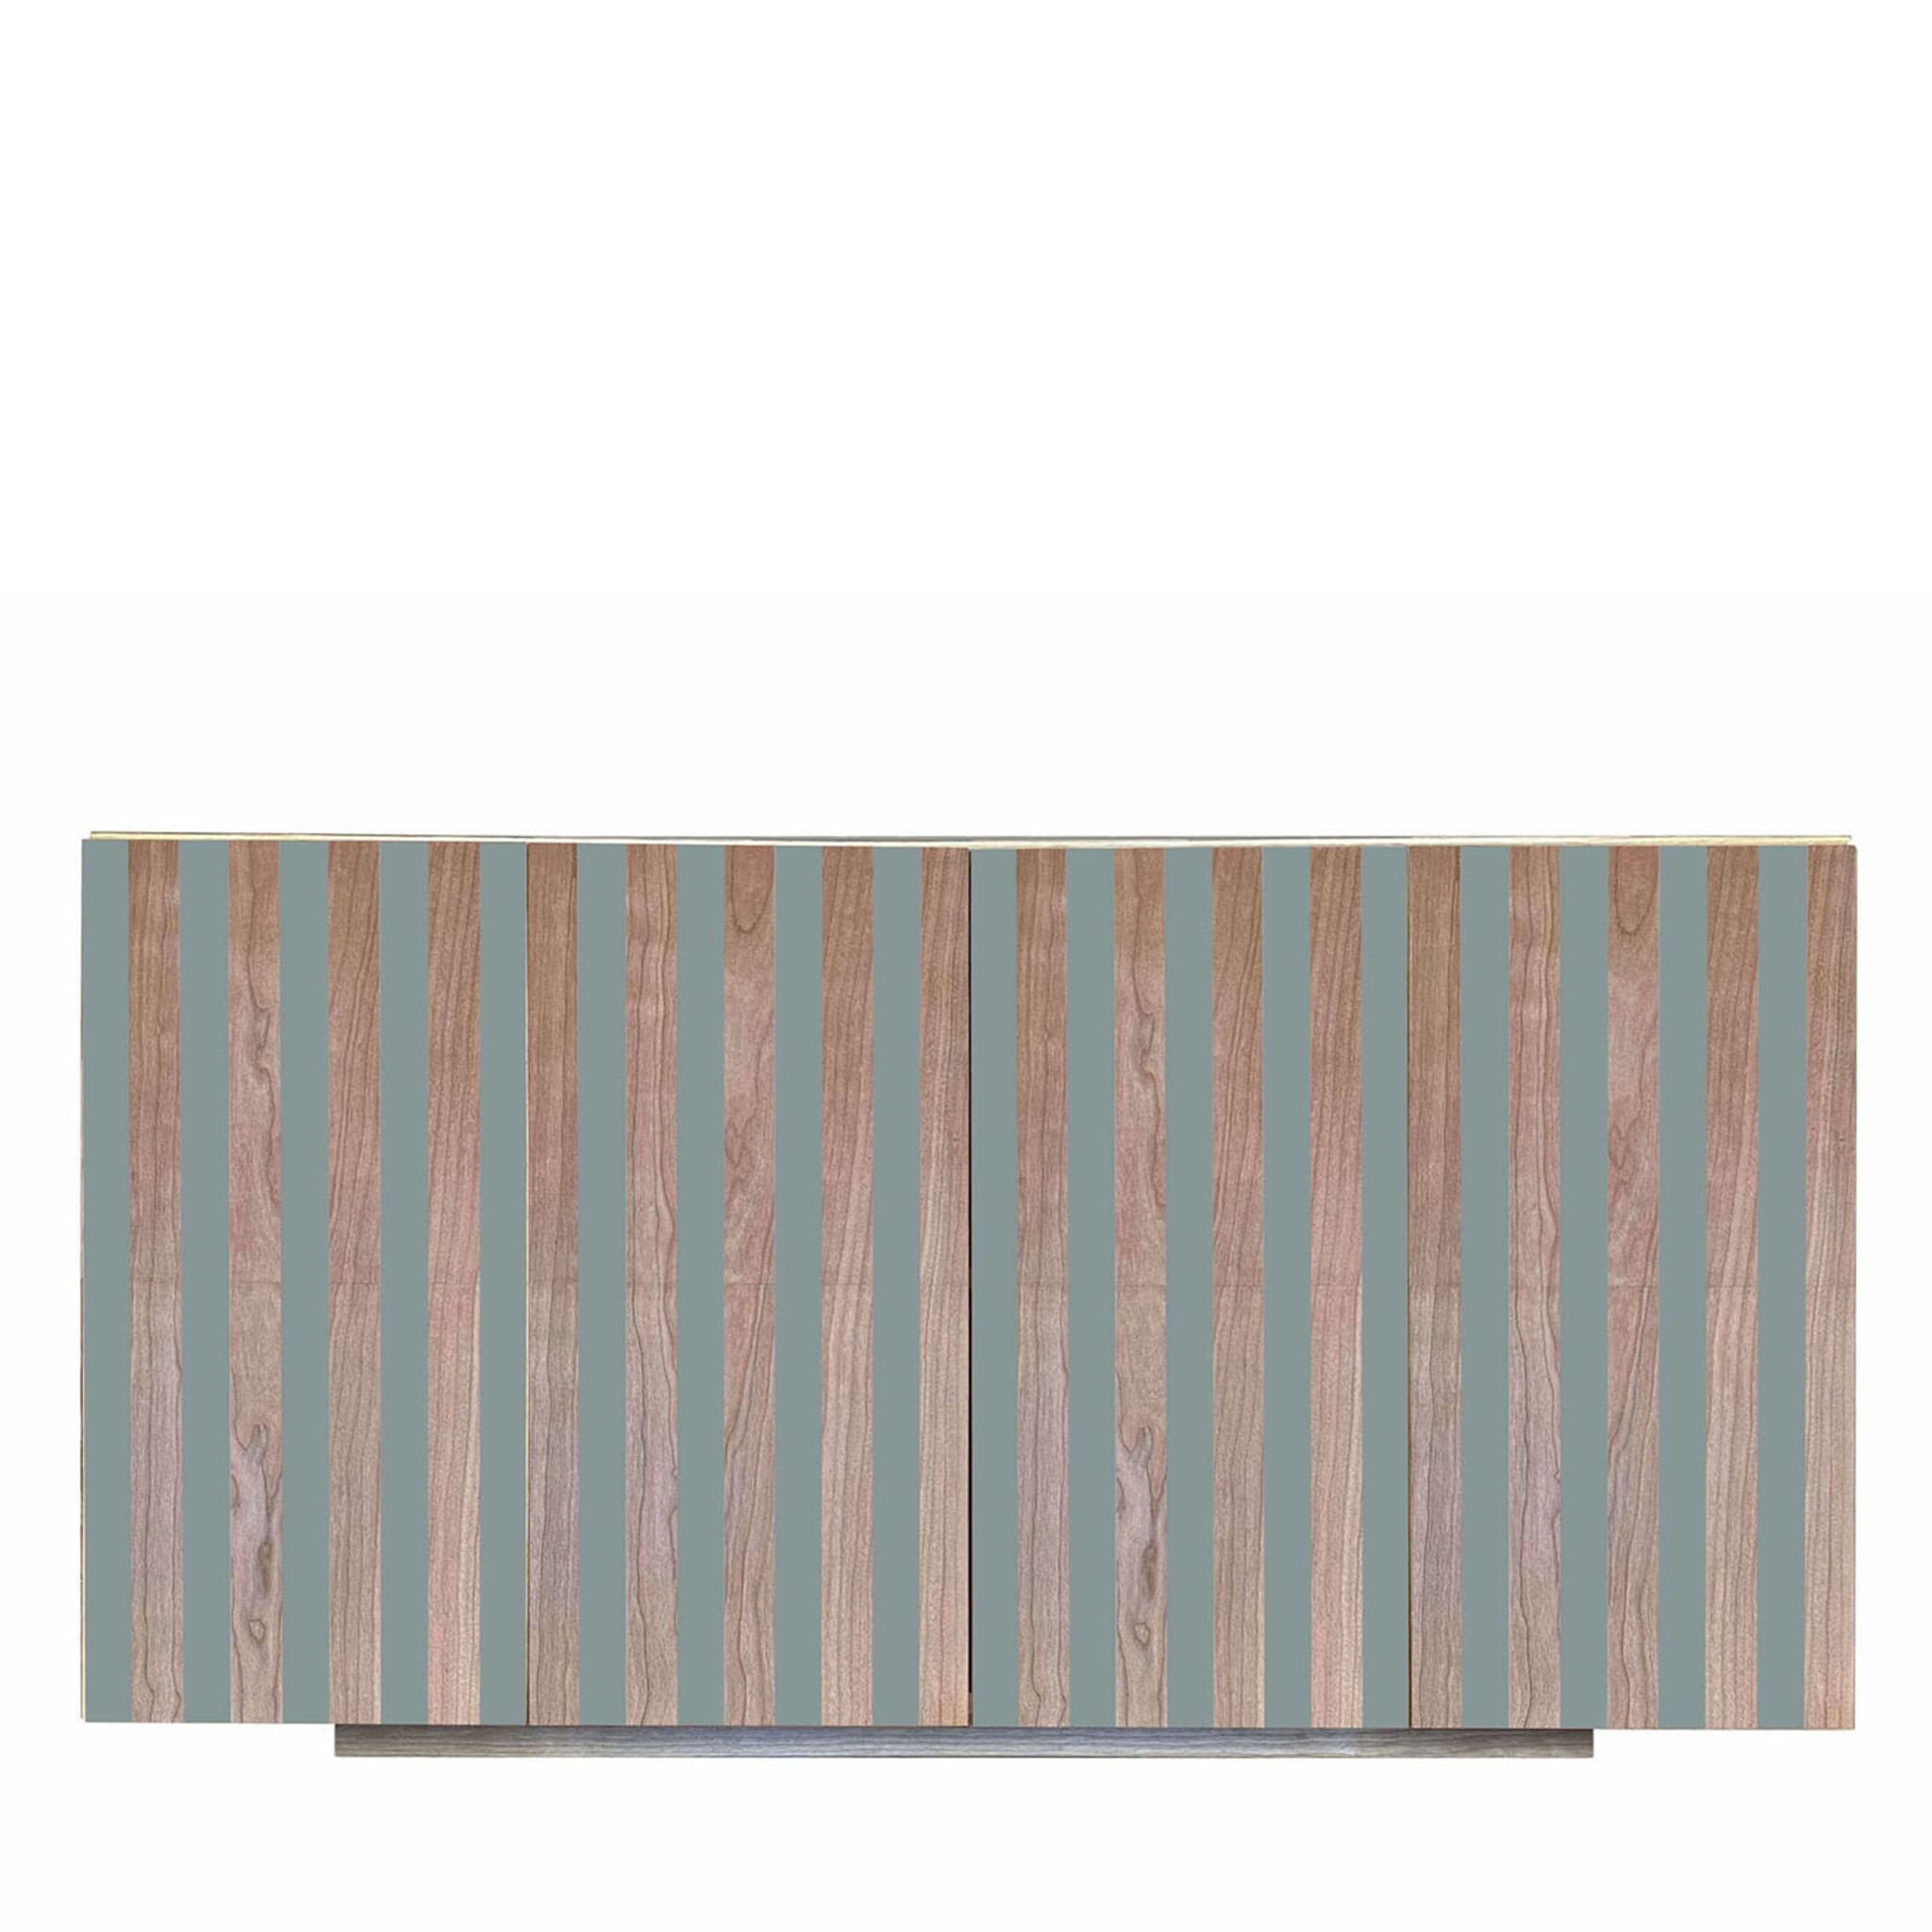 Md3 4-Door Striped Sideboard by Meccani Studio - Main view